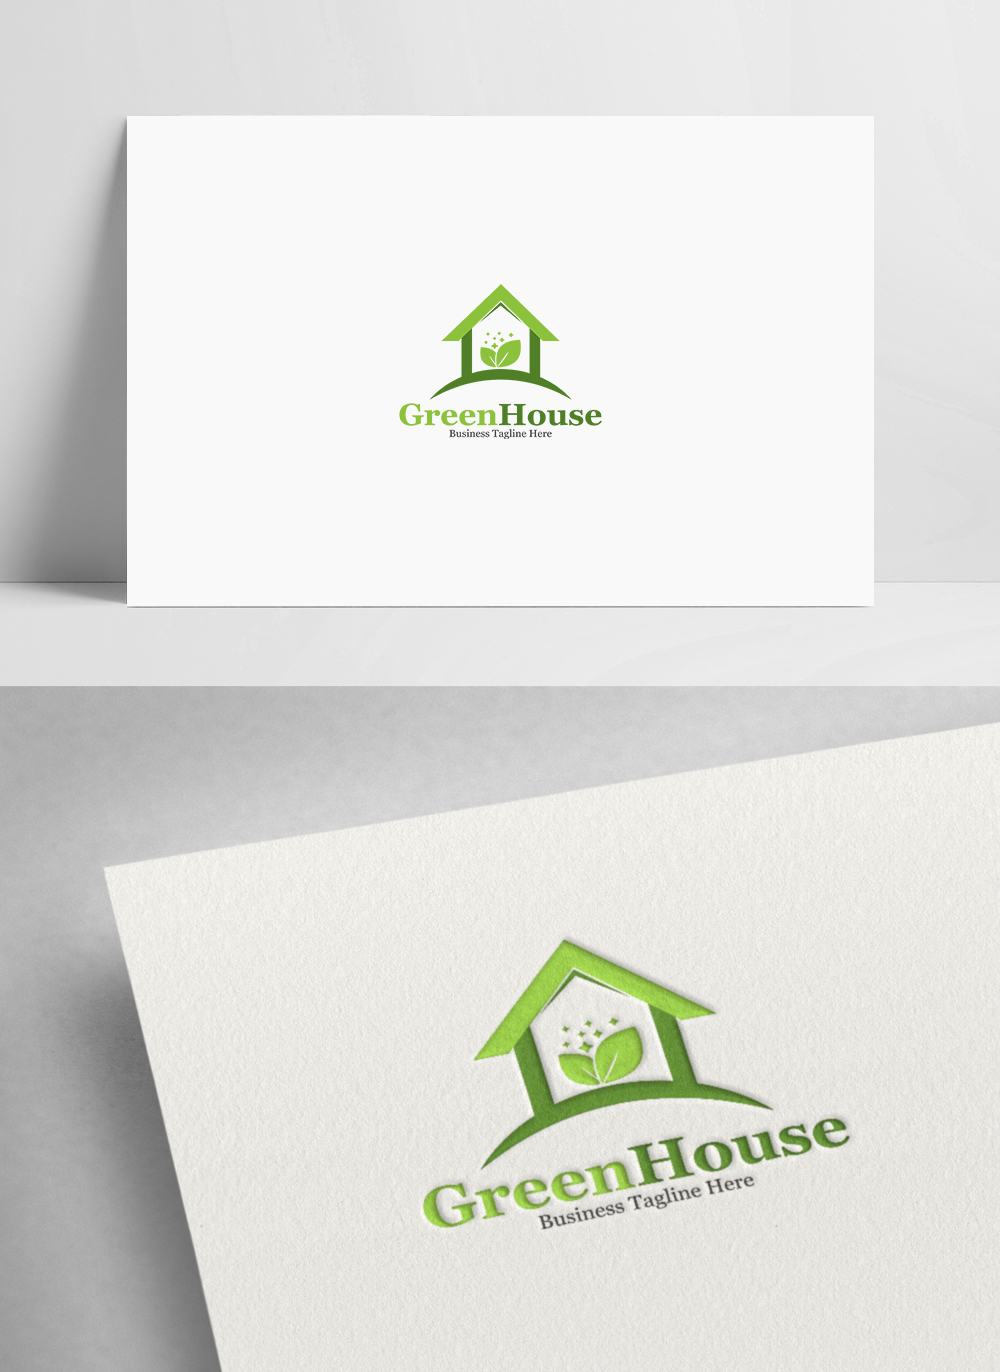 Quebec Logo Greenhouse Brand, competitive advantage, angle, text, triangle  png | PNGWing